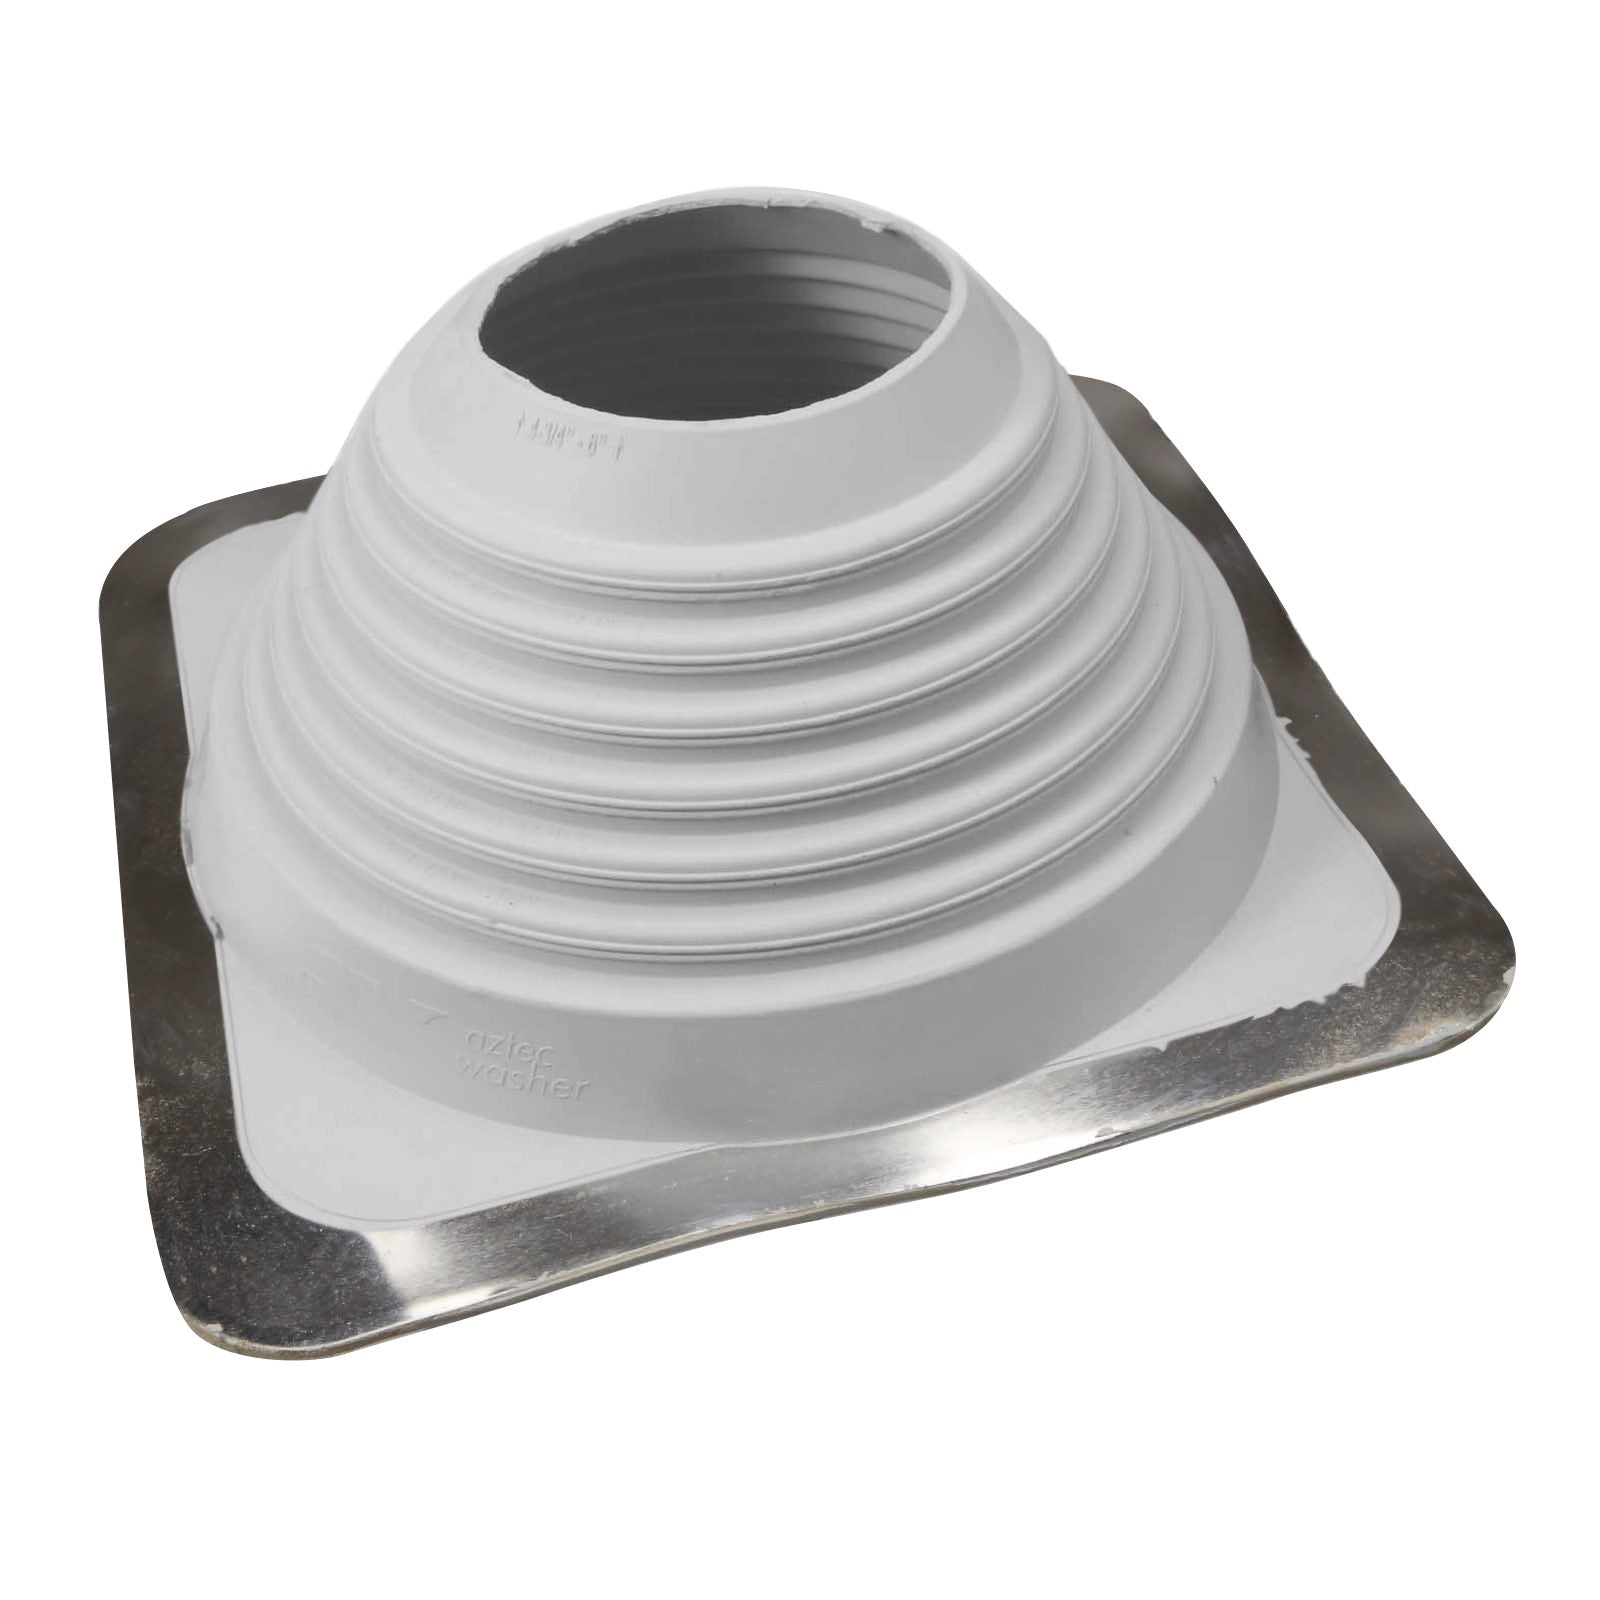 #6 Roofjack Square EPDM Pipe Flashing Boot White